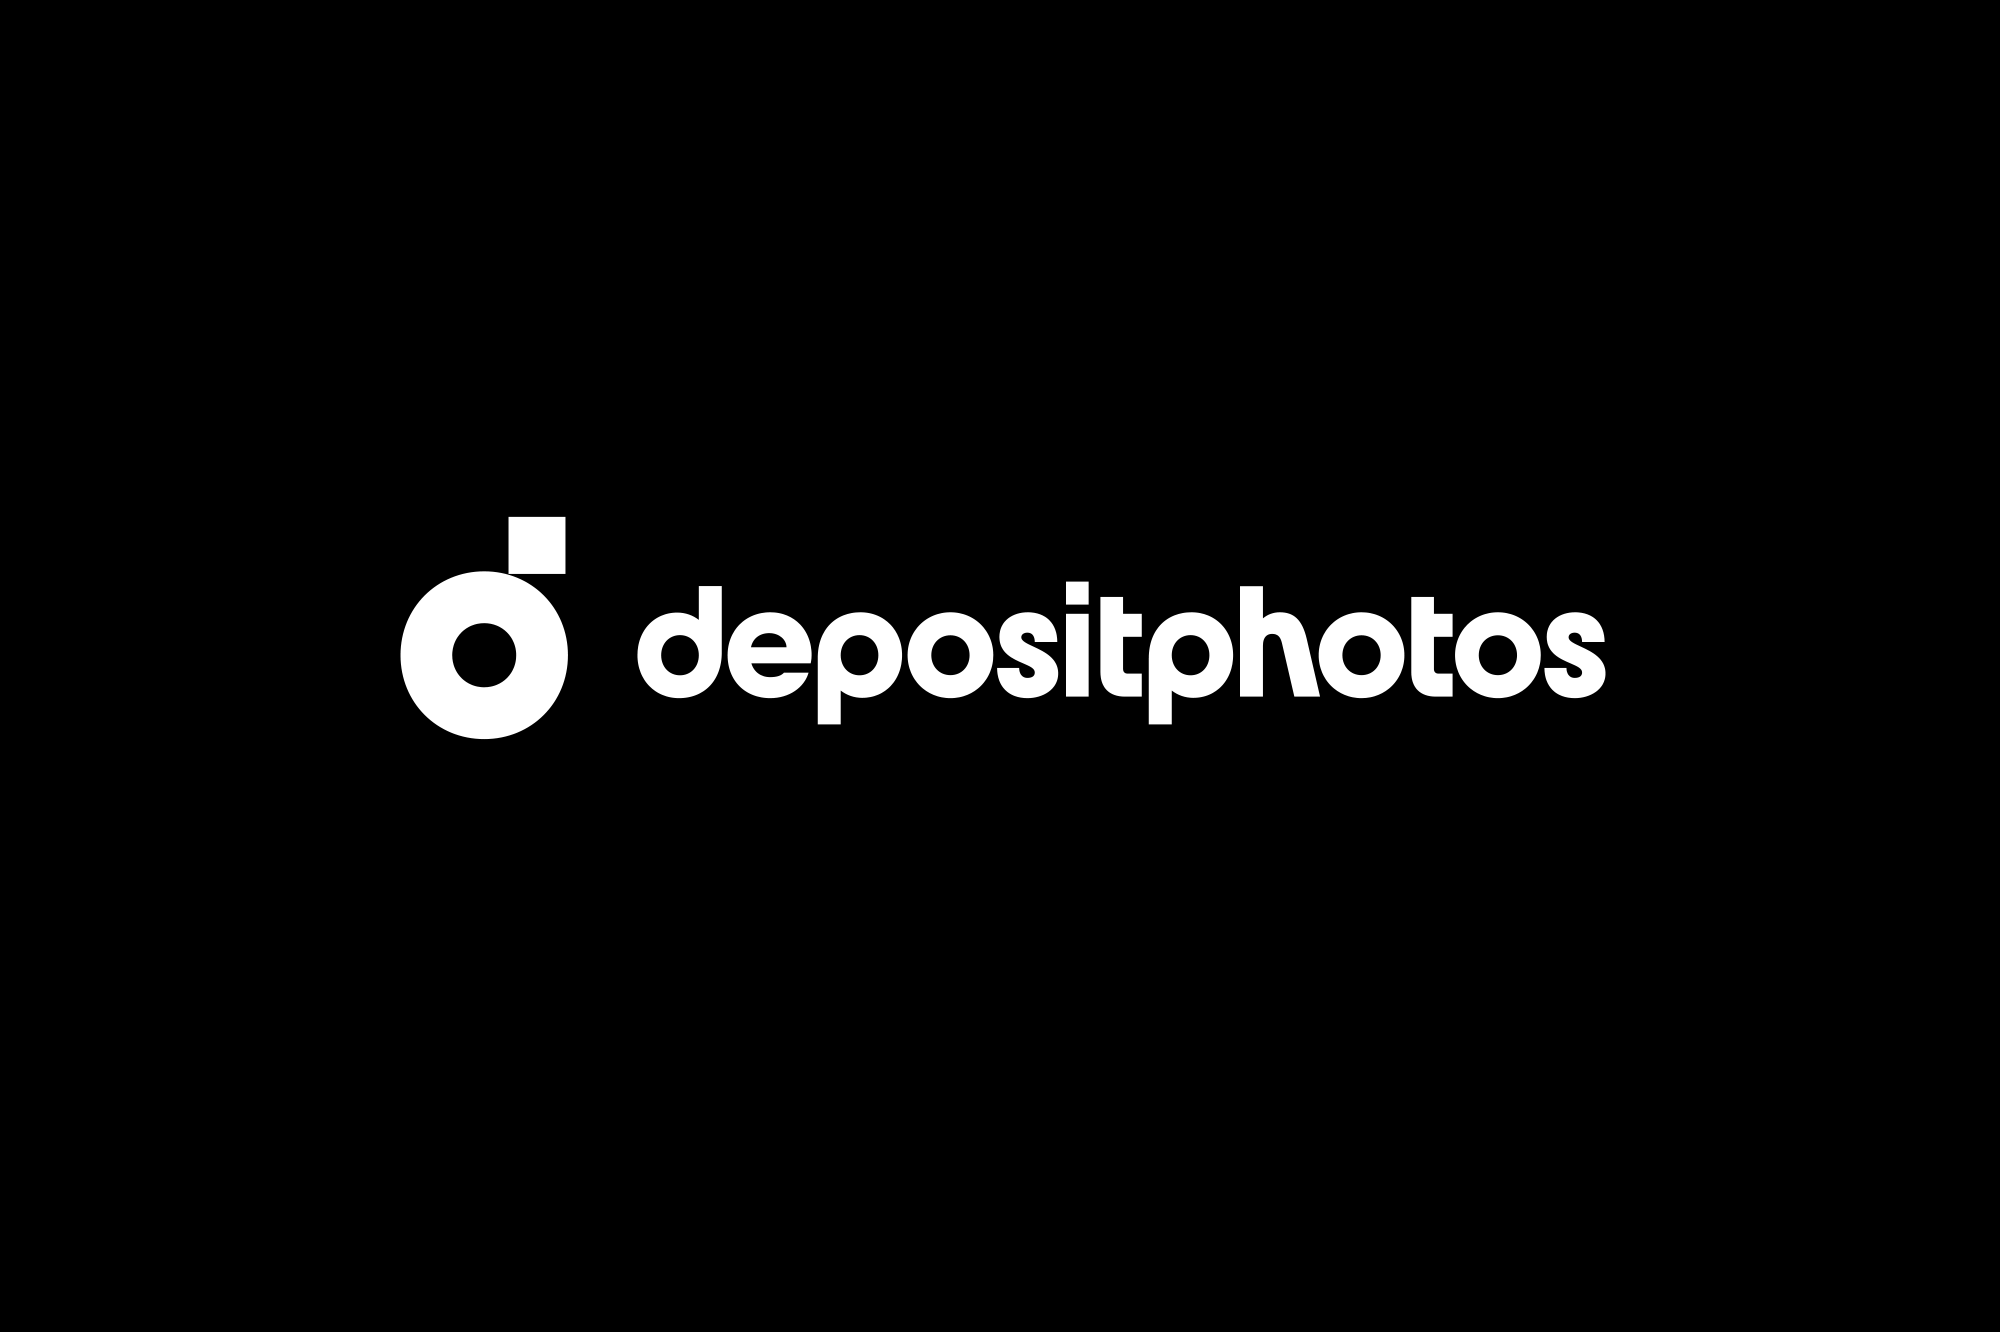 Depositphotos Has A New Logo! See How We Updated Our Brand Identity - Depositphotos Blog